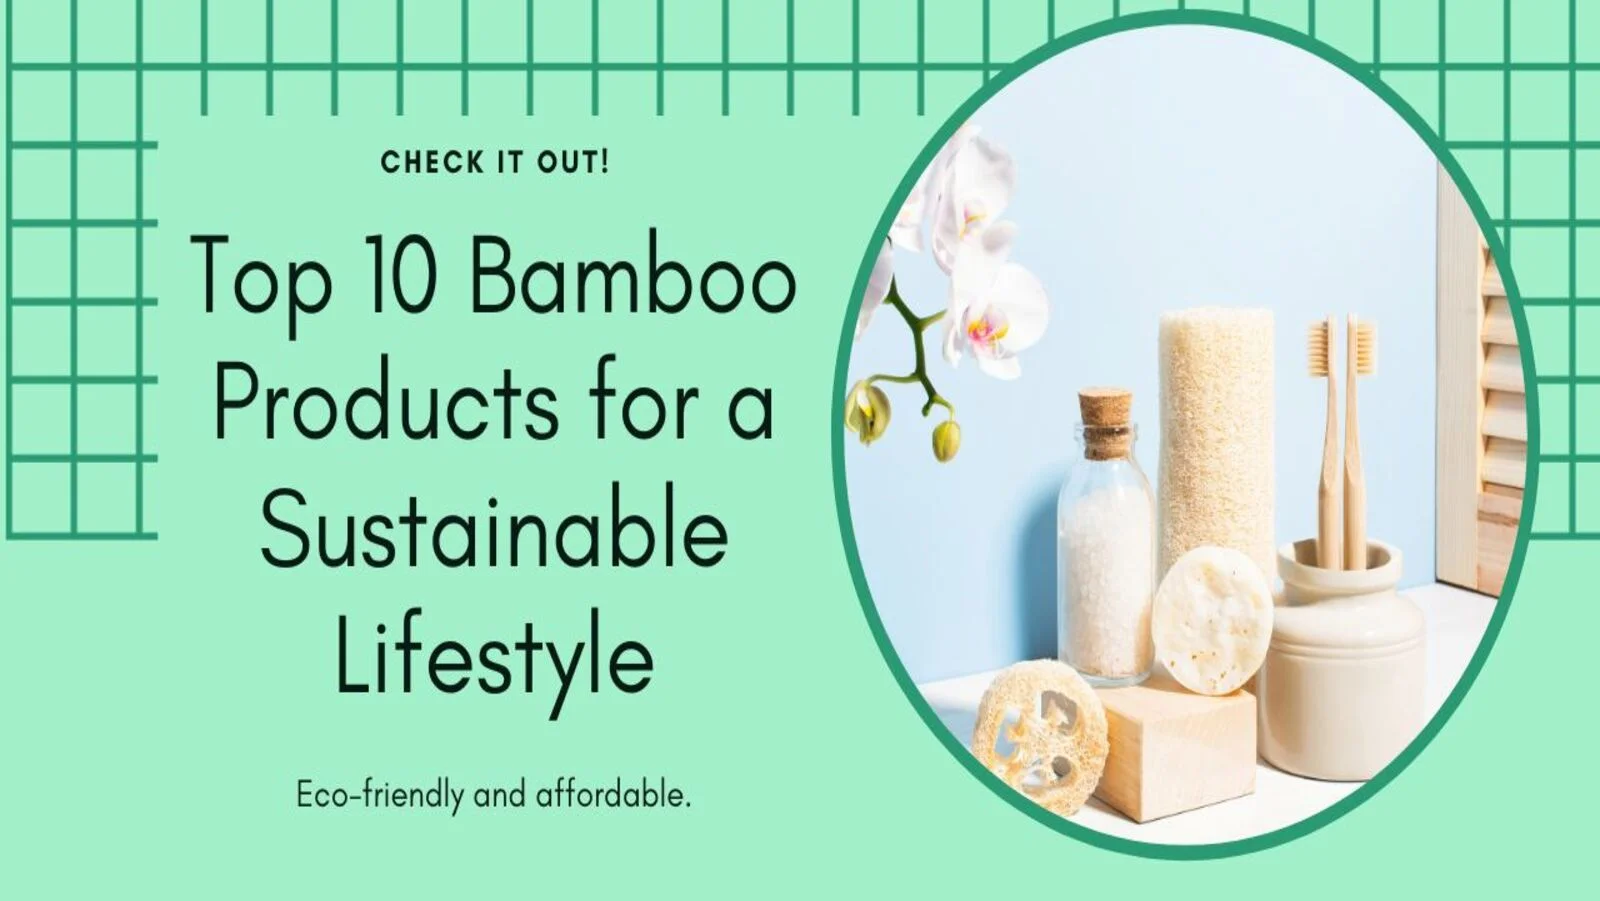 Top 10 Bamboo Products for a sustainable lifestyle